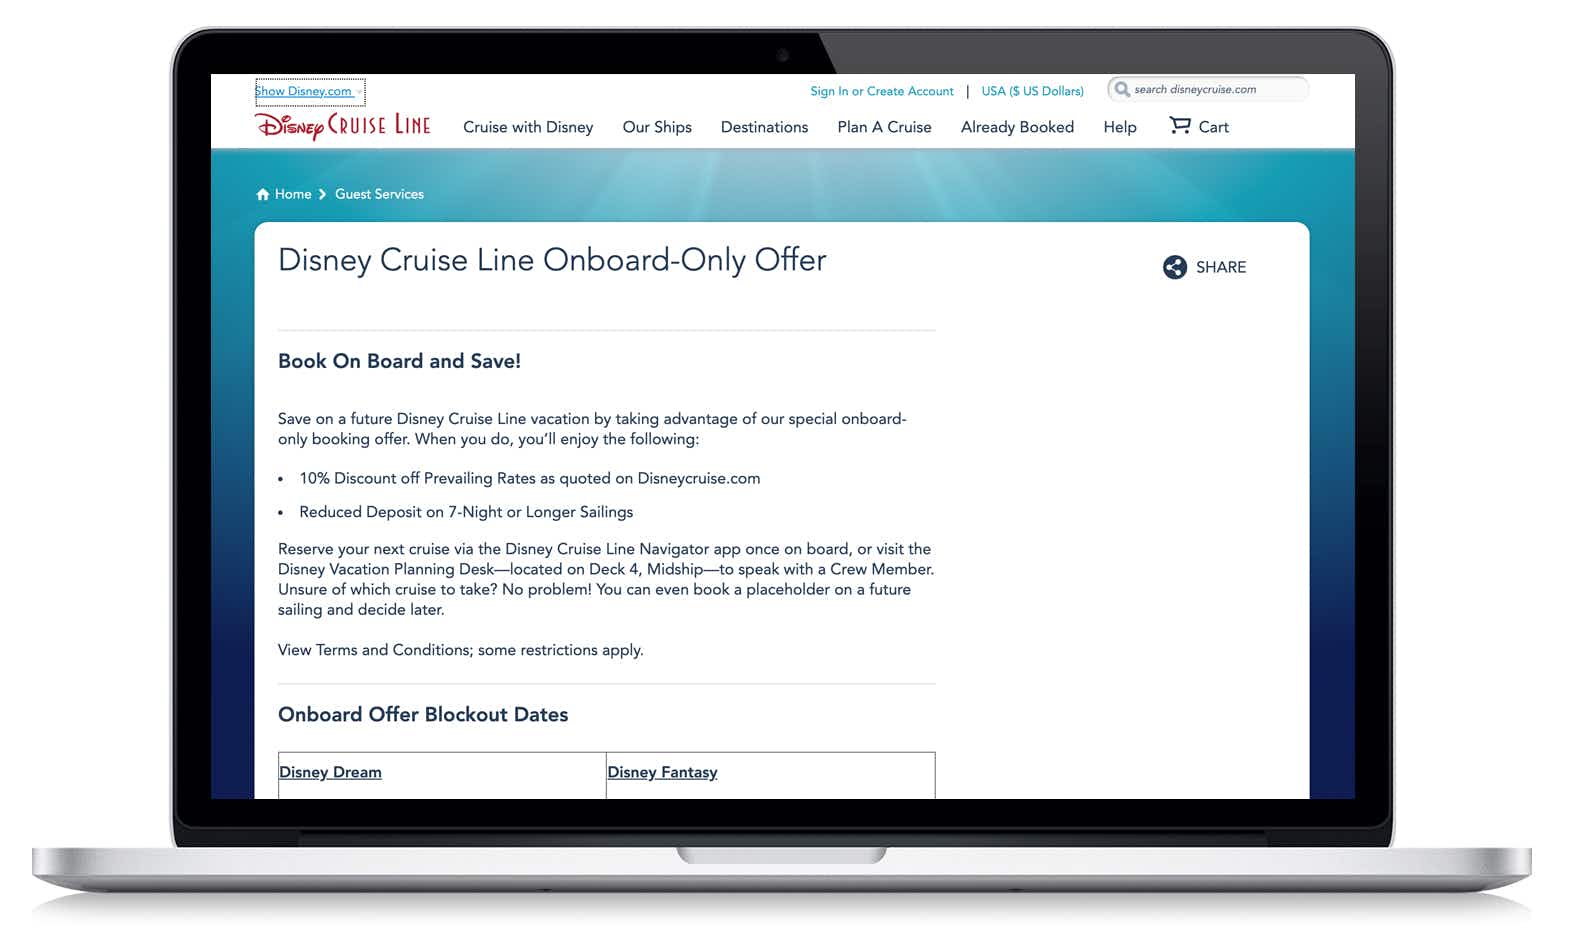 laptop with a screenshot showing onboard-only booking offers for disney cruise lines